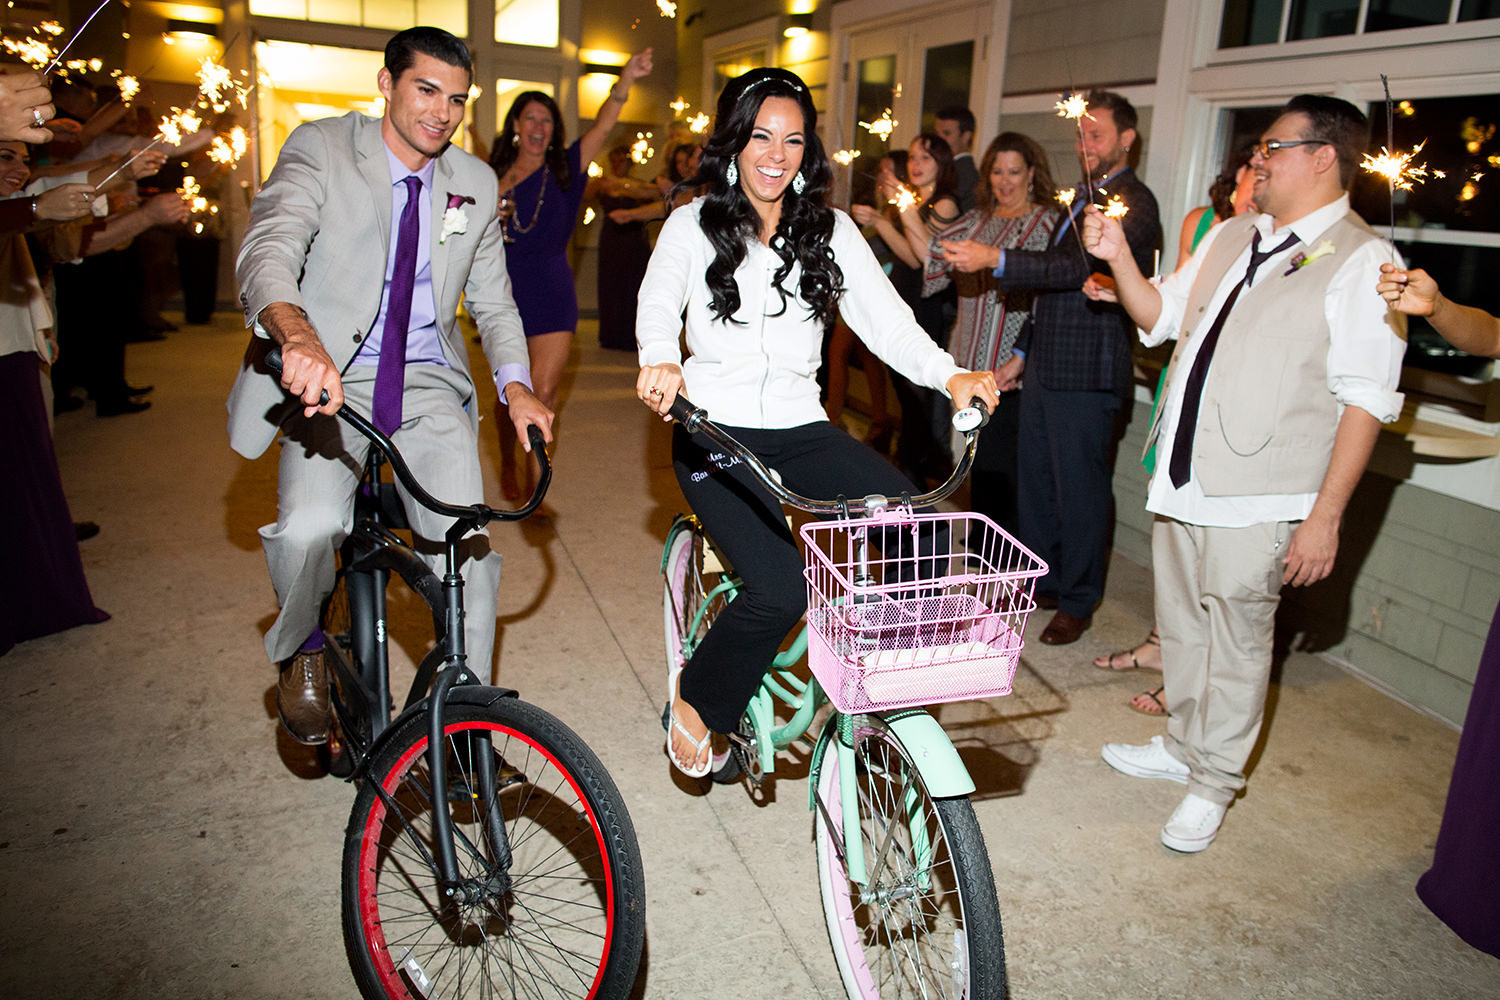 bride and groom leaving party on their bikes on coronado community center